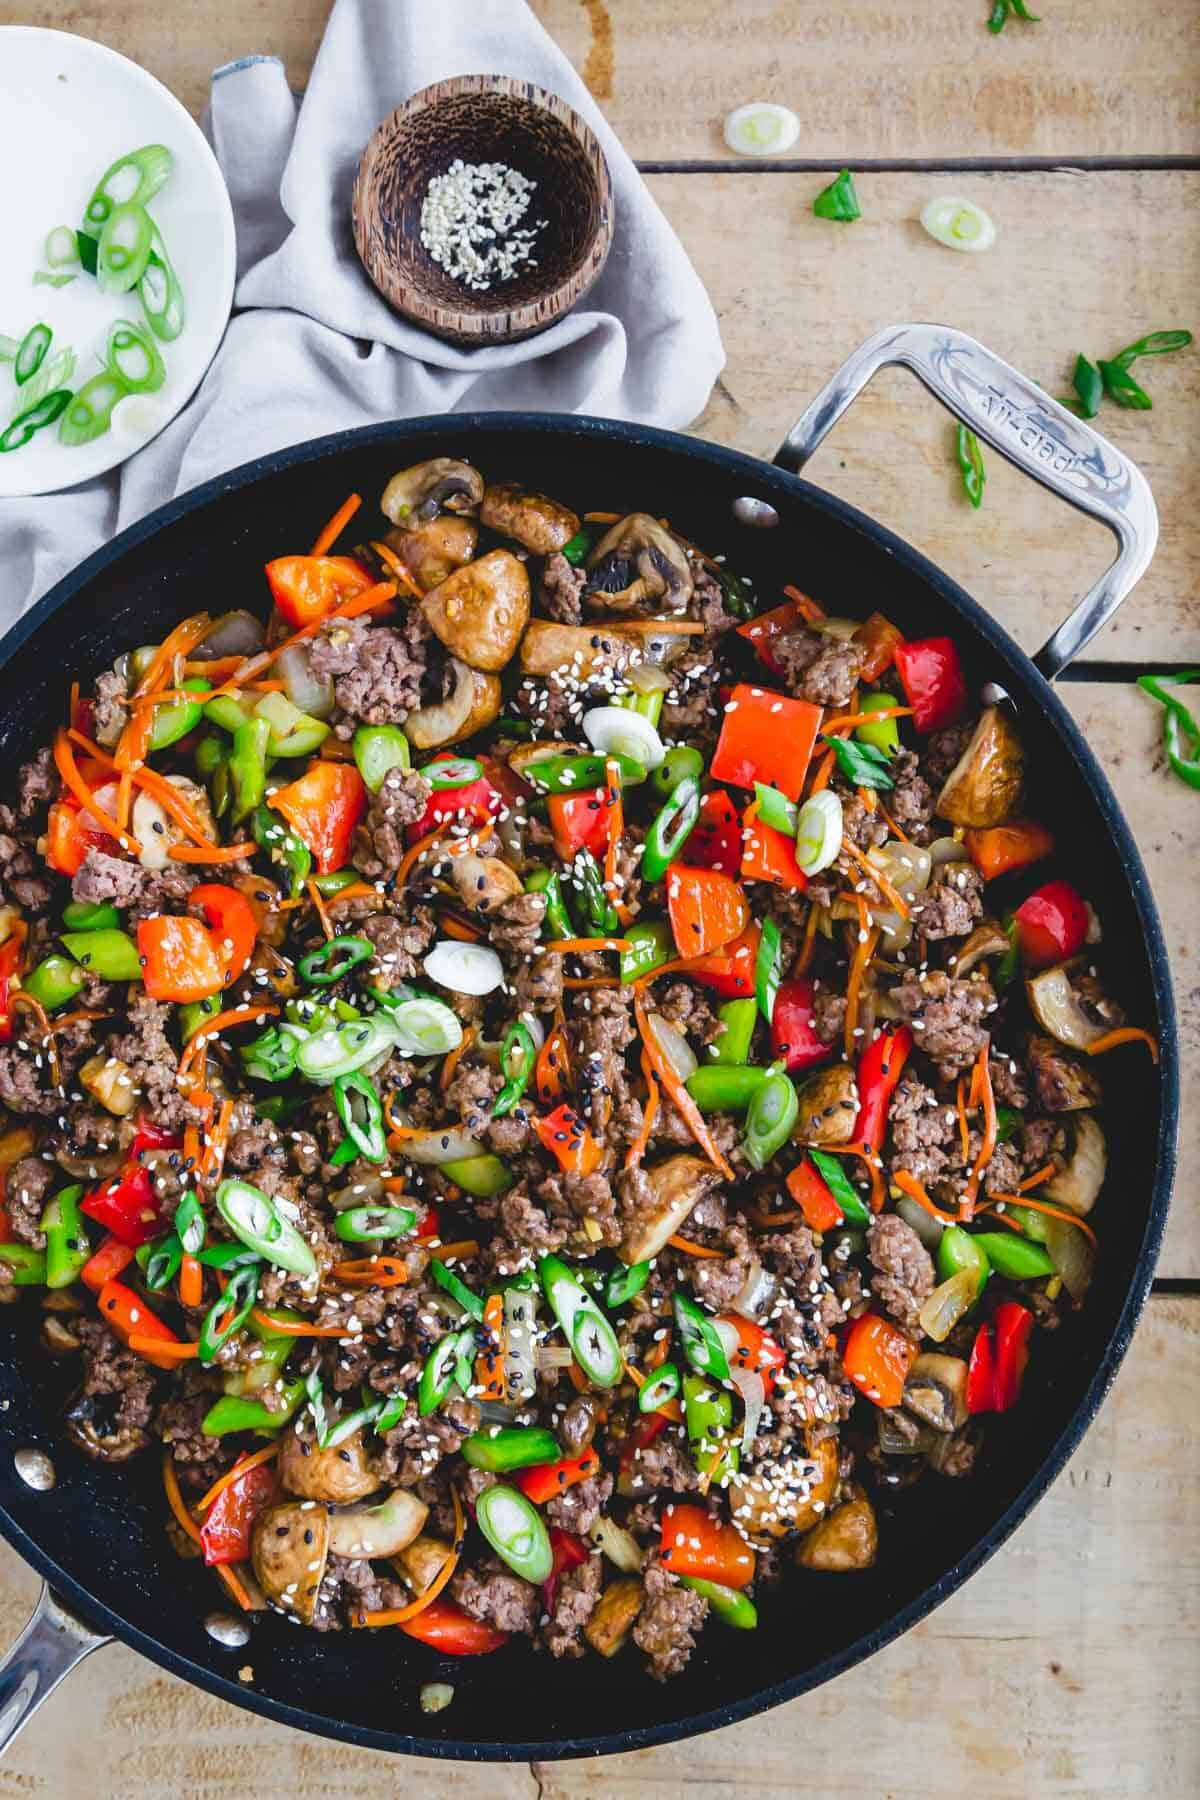 Ground beef stir fry with fresh vegetables in a black pan with sesame seeds and green onion garnish.